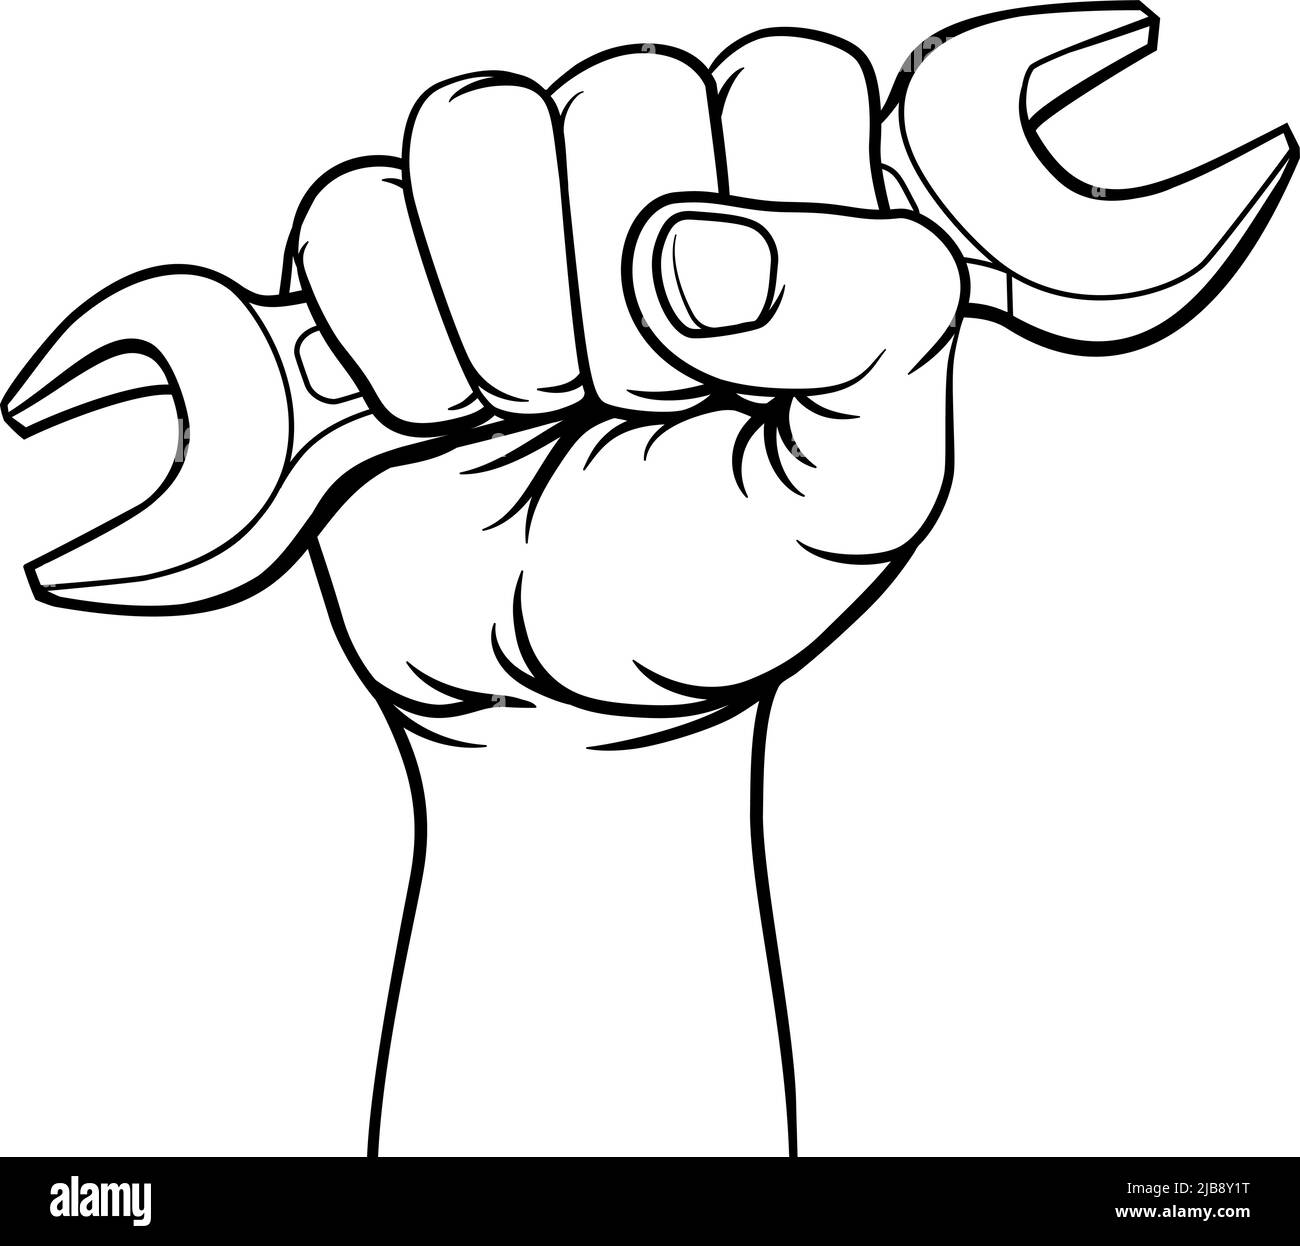 Fist Hand Holding Spanner Wrench Cartoon Concept Stock Vector